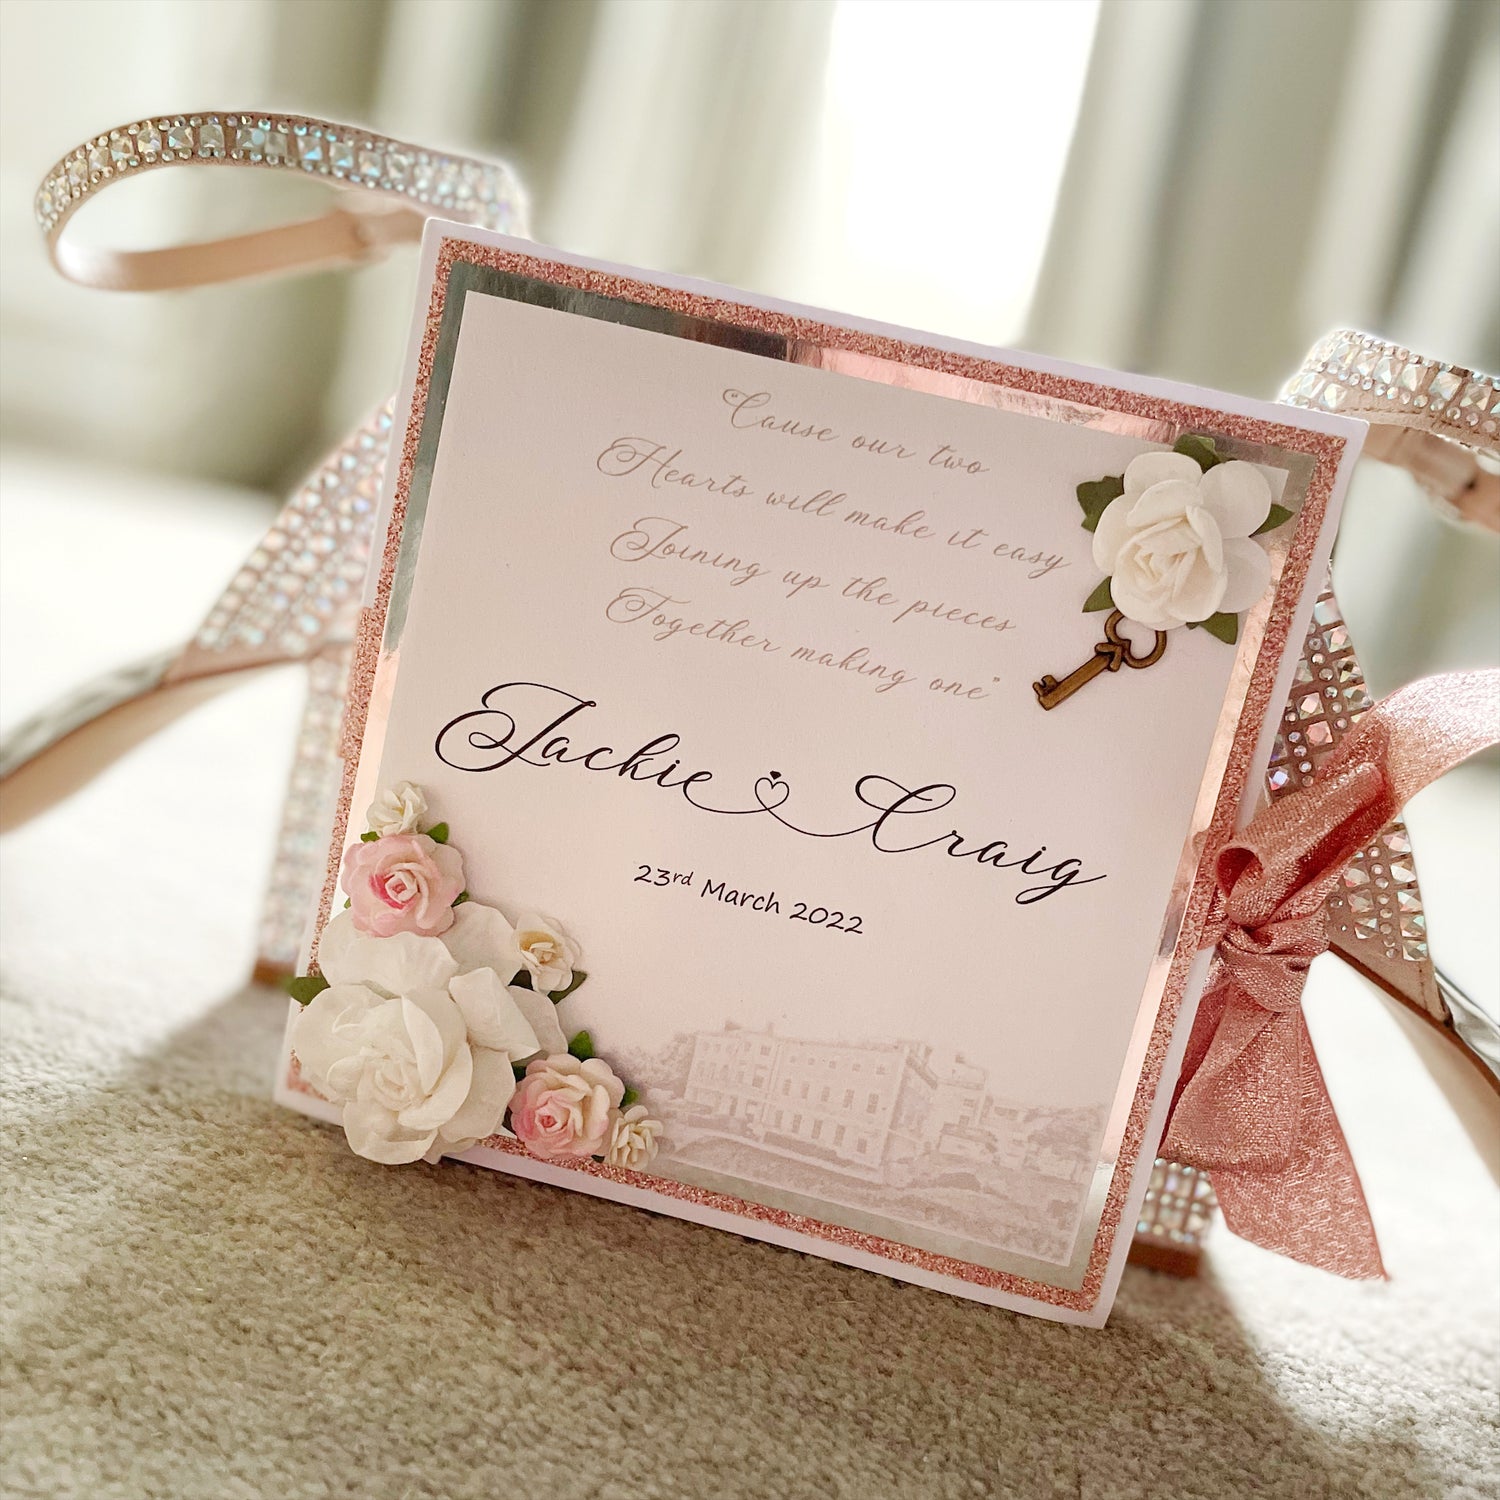 Handmade Wedding Invitation With Mulberry Paper Flowers, Glitter Card, Mirror Card and Embellishments